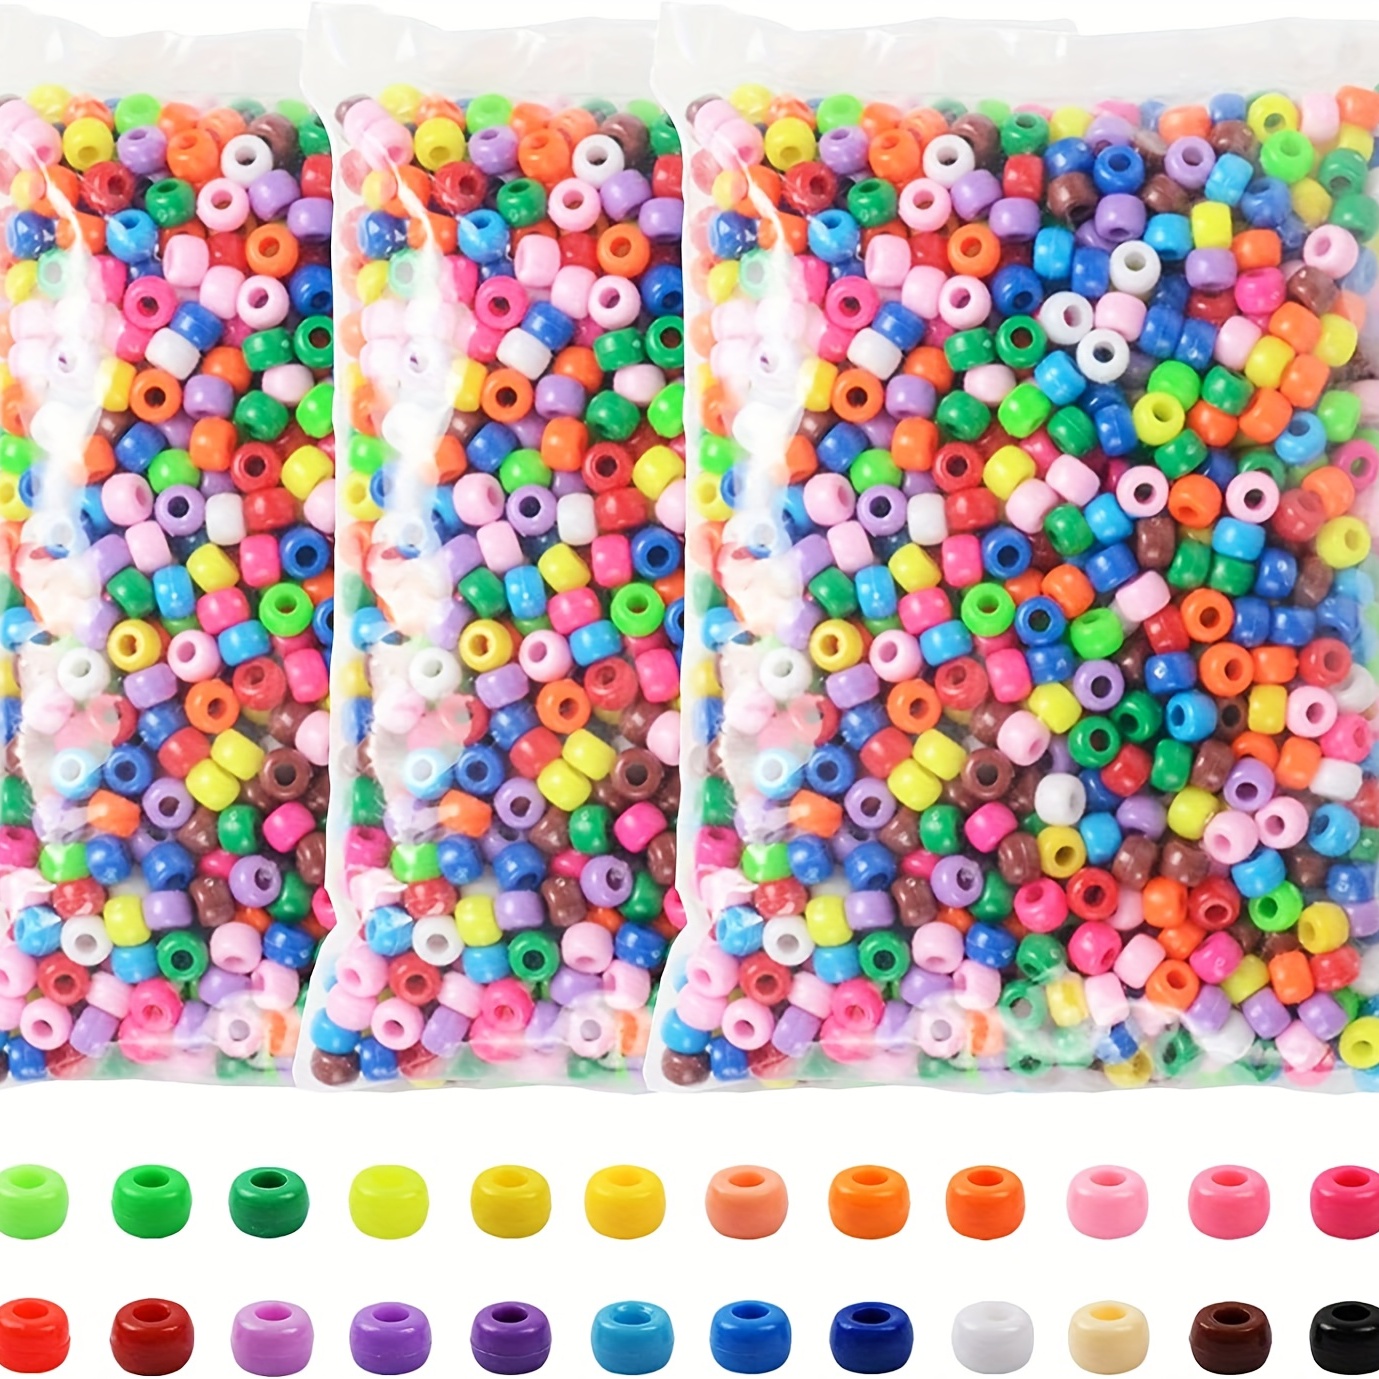  1100pcs Pony Beads,Friendship Bracelet Beads Kit,Beads for Jewelry  Making,Hair Beads,Beads for Bracelets Making,Beads for Crafts Pony Beads  Bulk Kandi Beads Hair Beads for Braids,Bulk Beads